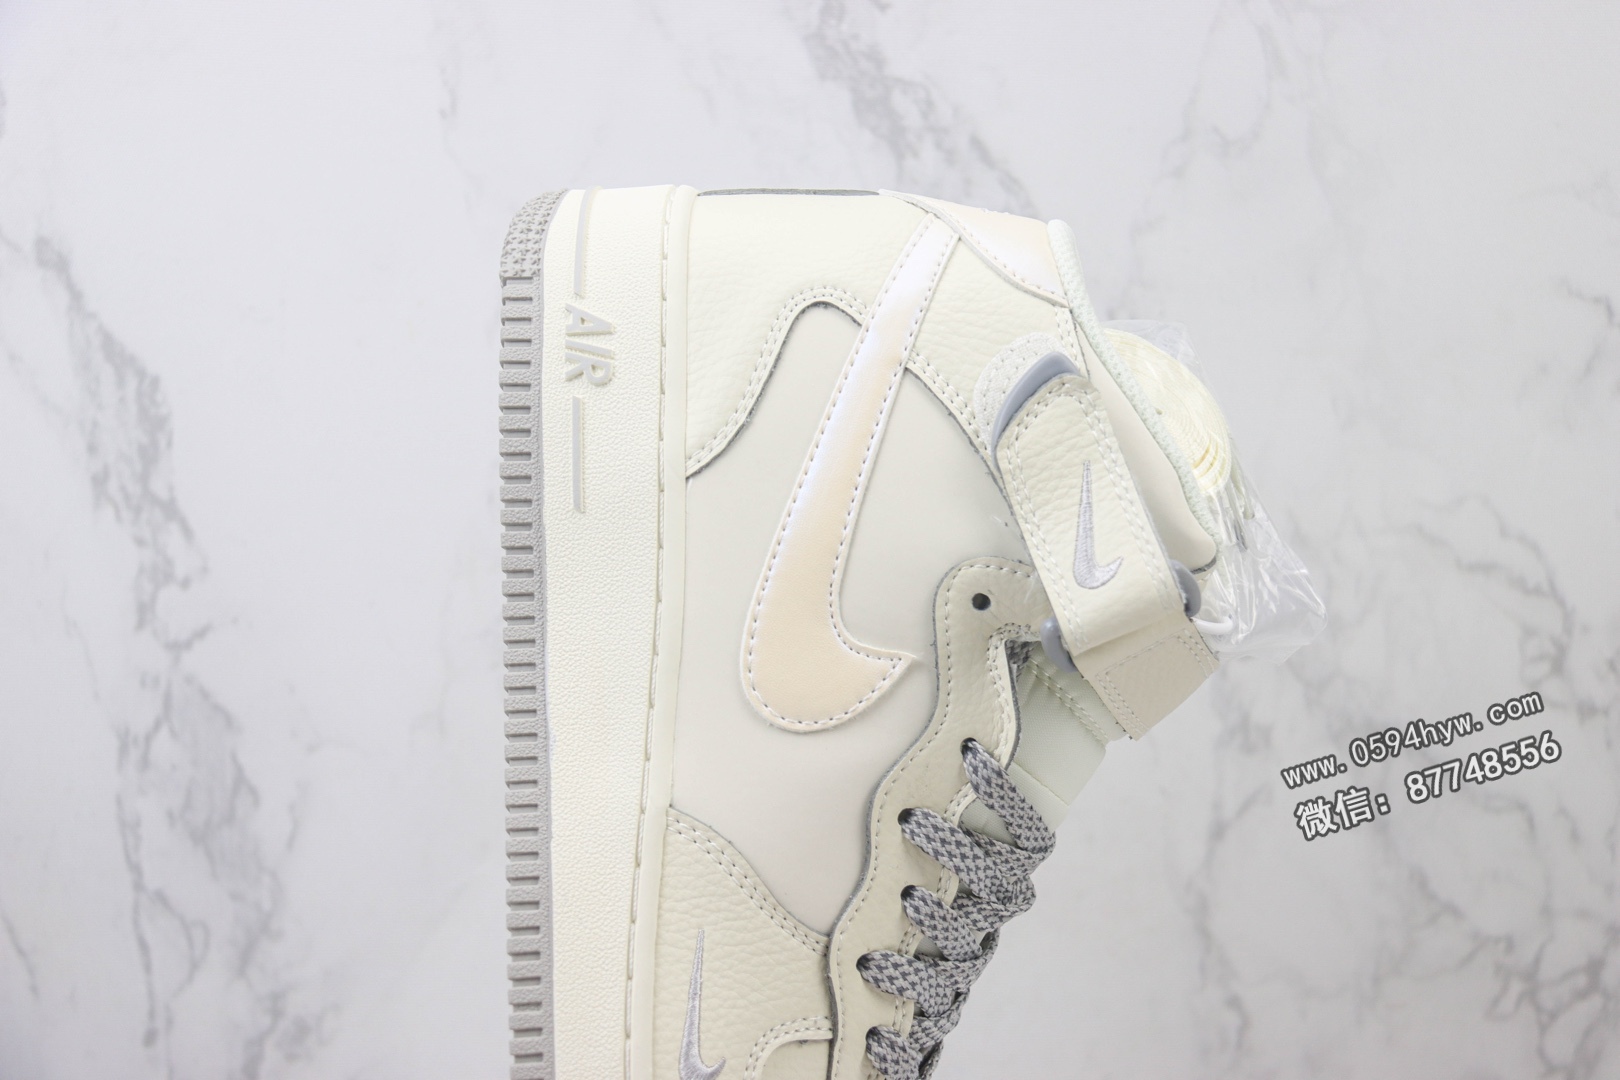 RO, PE, FORCE 1, Air Force 1 Mid, Air Force 1, AI - 空军 SG2356-806 珠光白灰 双勾 Air Force 1 Mid